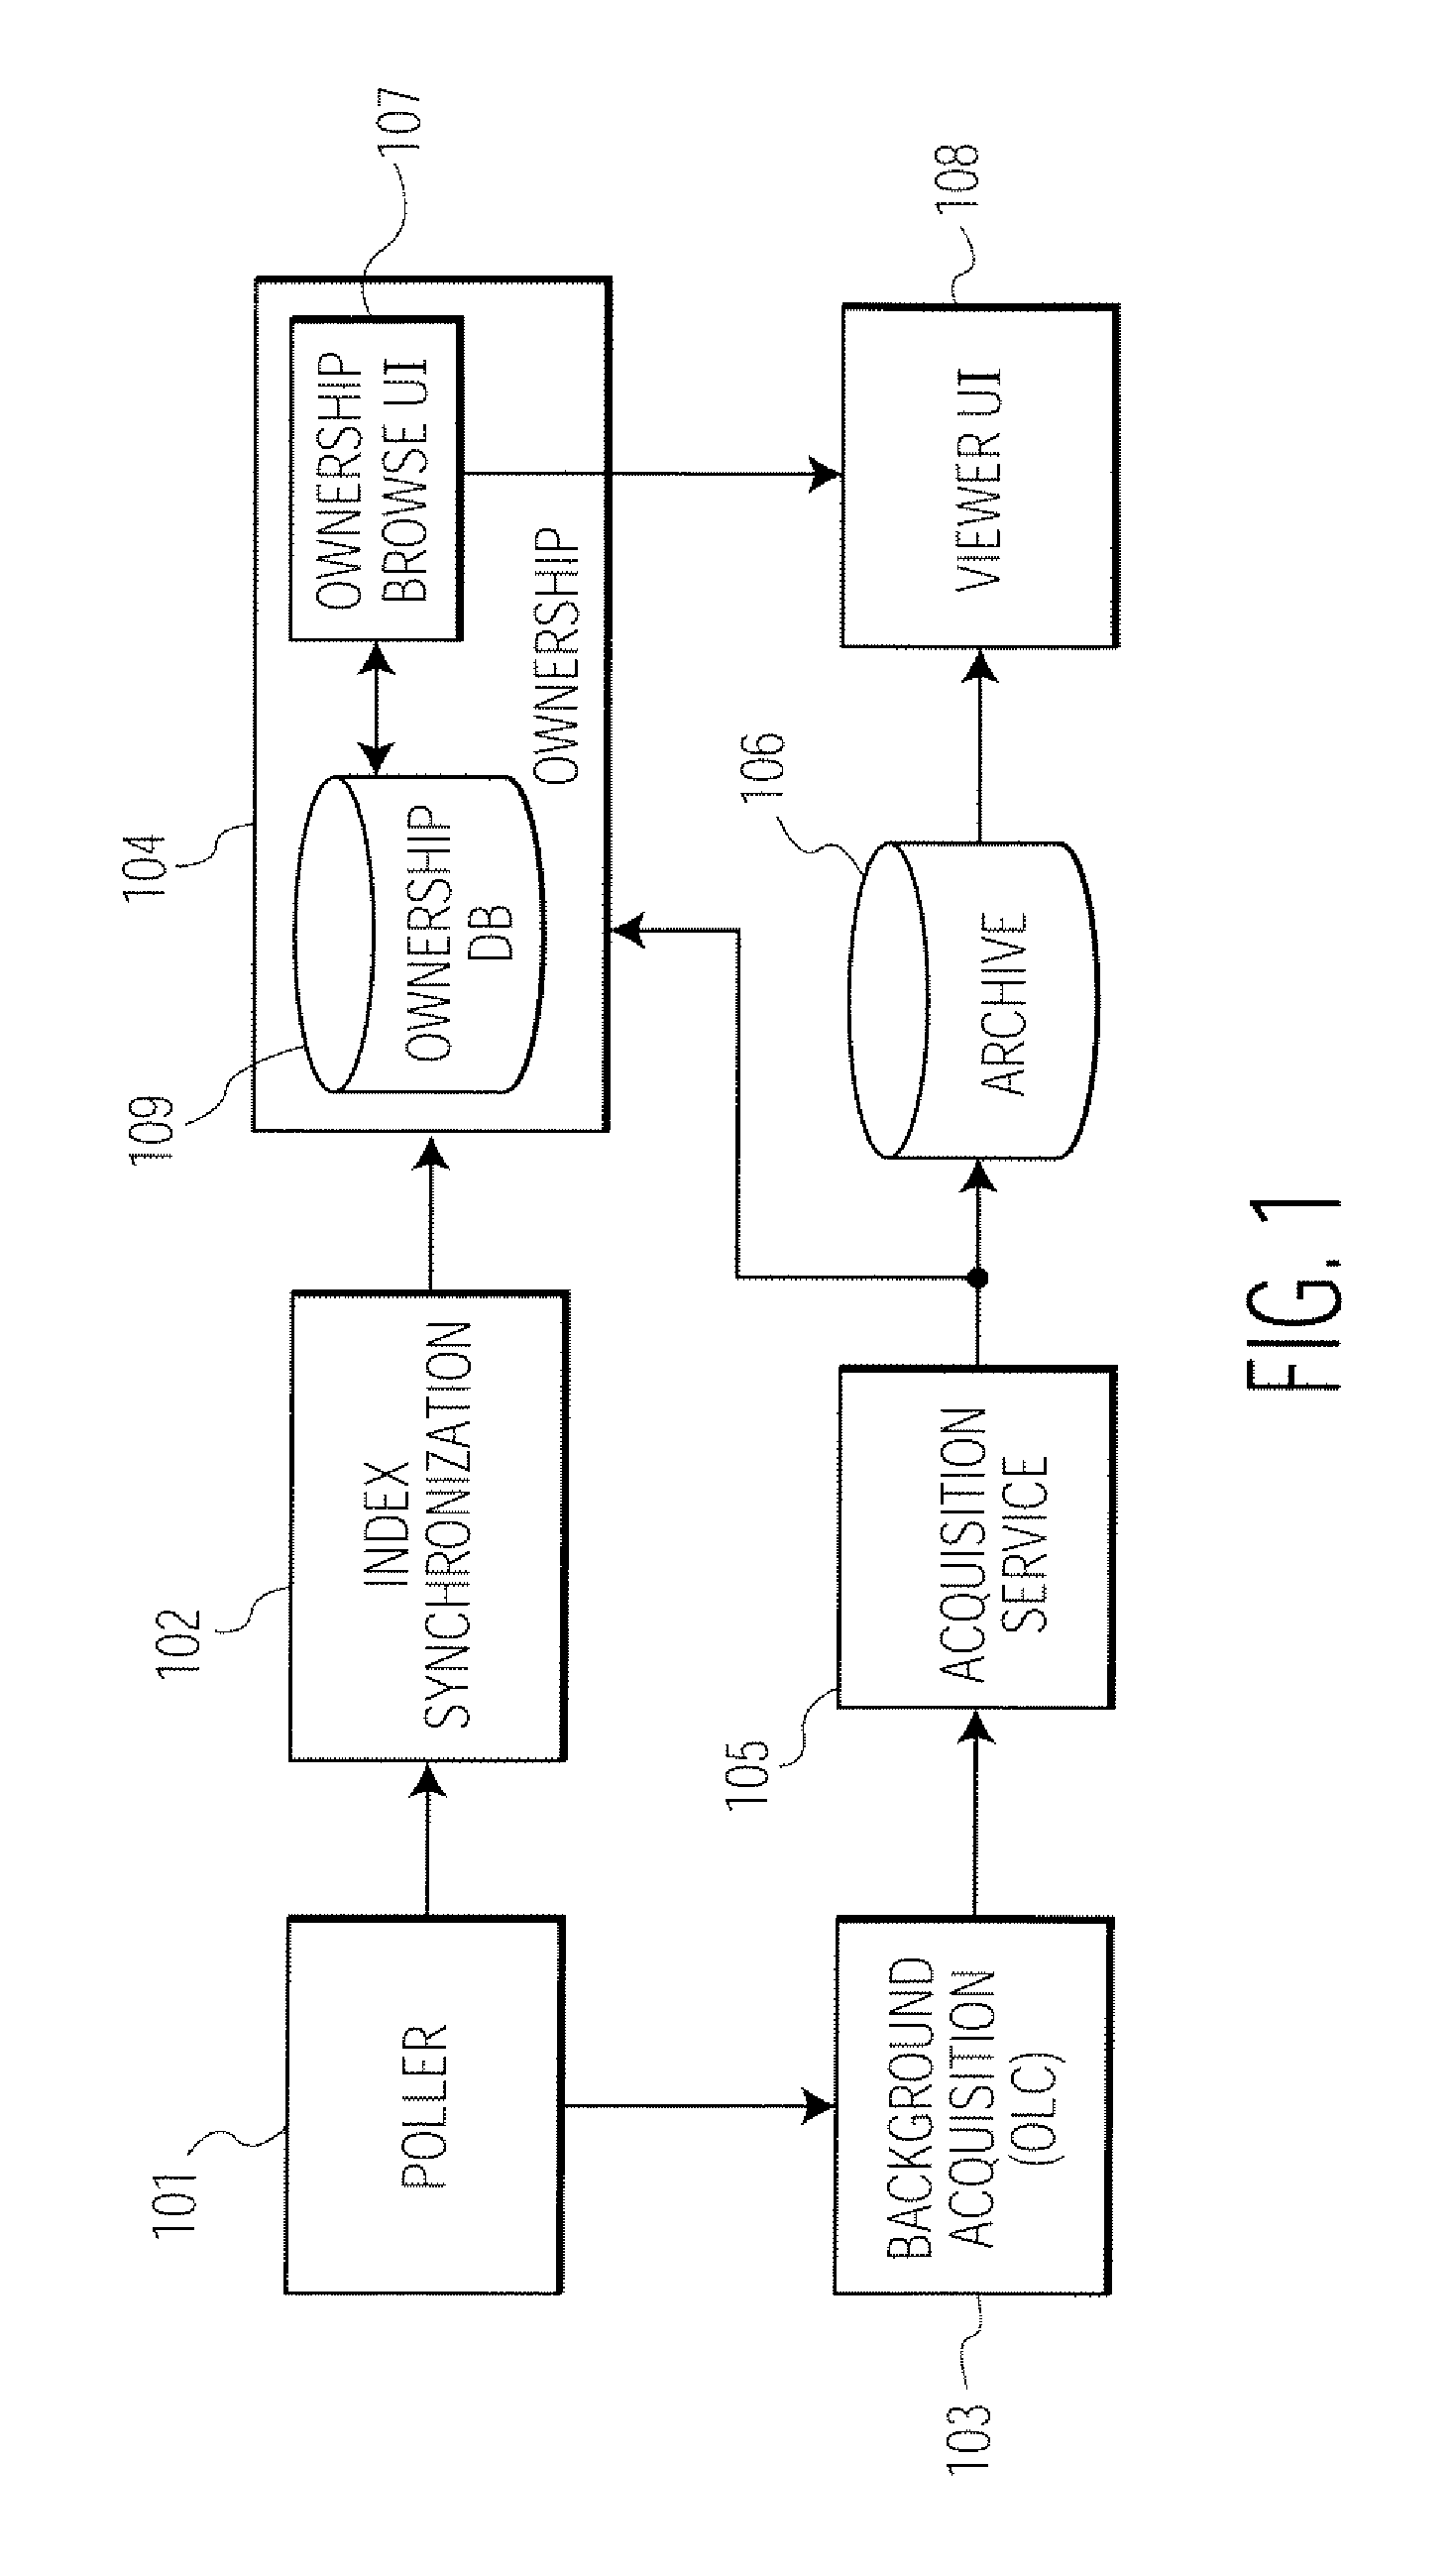 System for managing object storage and retrieval in partitioned storage media